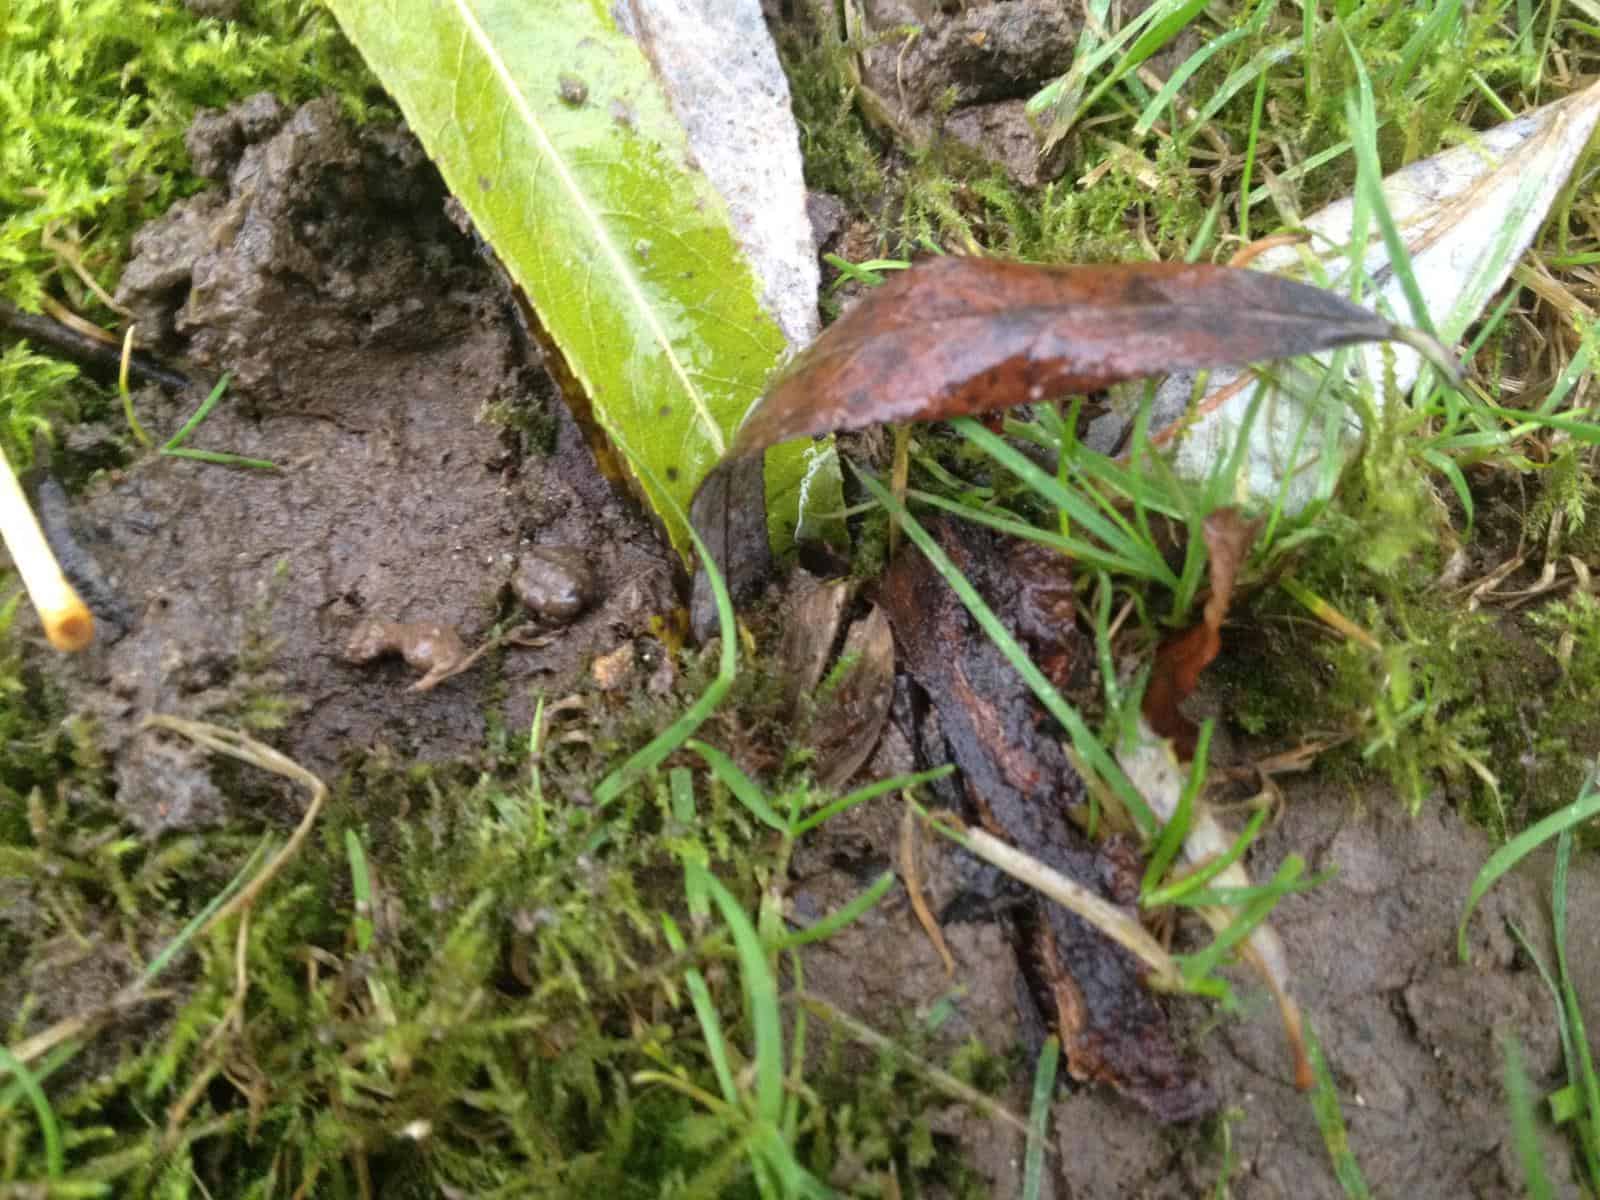 earthworm cast and leaf partially dragged into a burrow